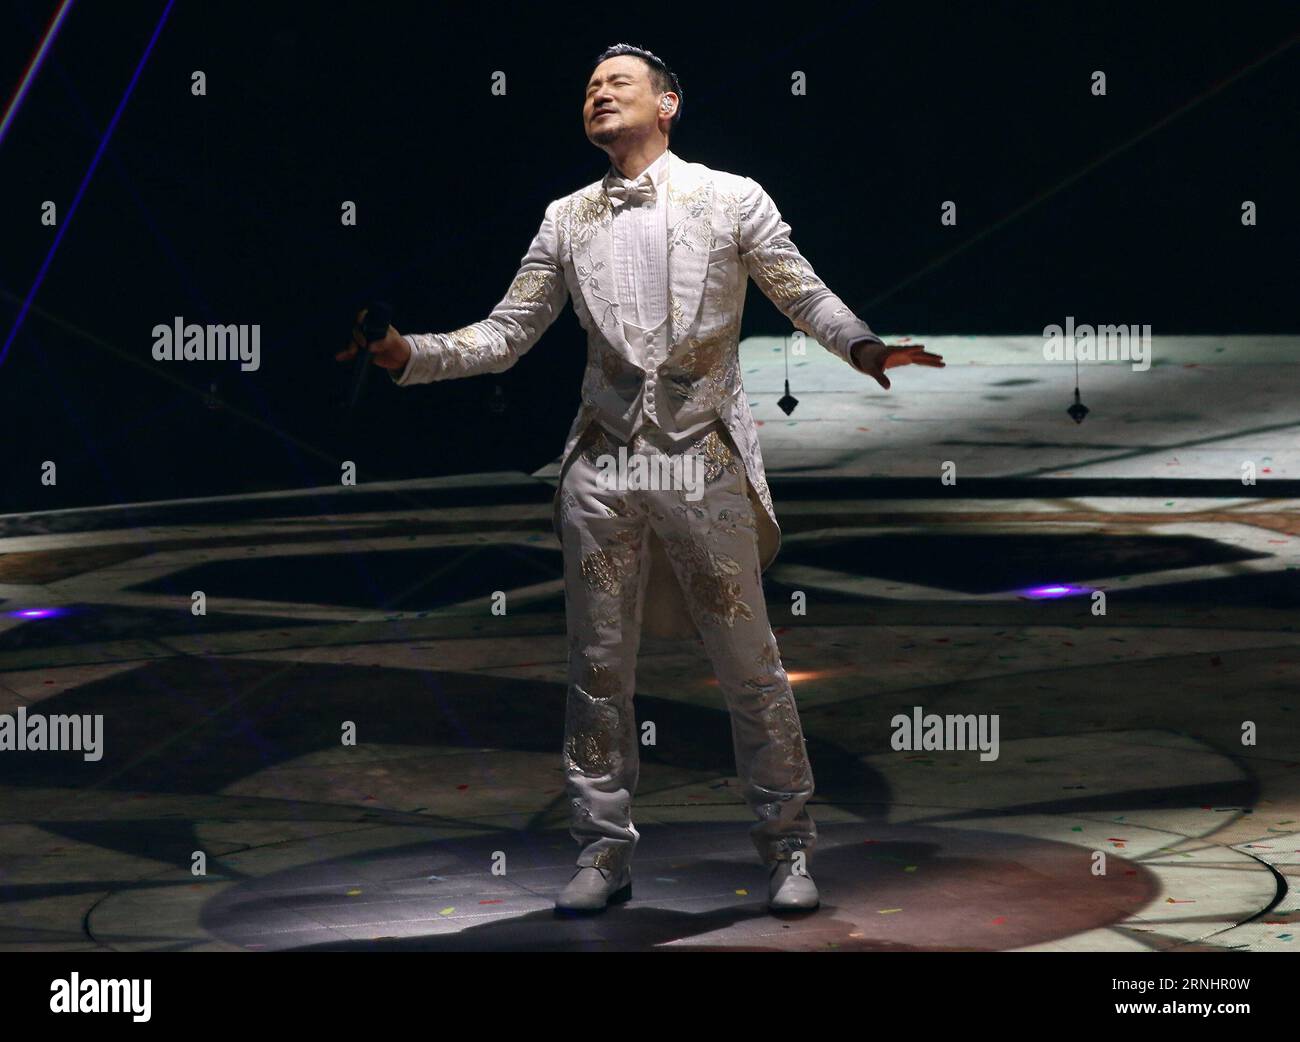 (161206) -- HONG KONG, Dec. 5, 2016 -- Singer Jacky Cheung performs during his world tour concert A Classic Tour in Hong Kong, south China, Dec. 5, 2016. ) (zwx) CHINA-HONG KONG-JACKY CHEUNG-WORLD TOUR CONCERT (CN) WangxXi PUBLICATIONxNOTxINxCHN   Hong Kong DEC 5 2016 Singer Jacky Cheung performs during His World Tour Concert a Classic Tour in Hong Kong South China DEC 5 2016 zwx China Hong Kong Jacky Cheung World Tour Concert CN  PUBLICATIONxNOTxINxCHN Stock Photo